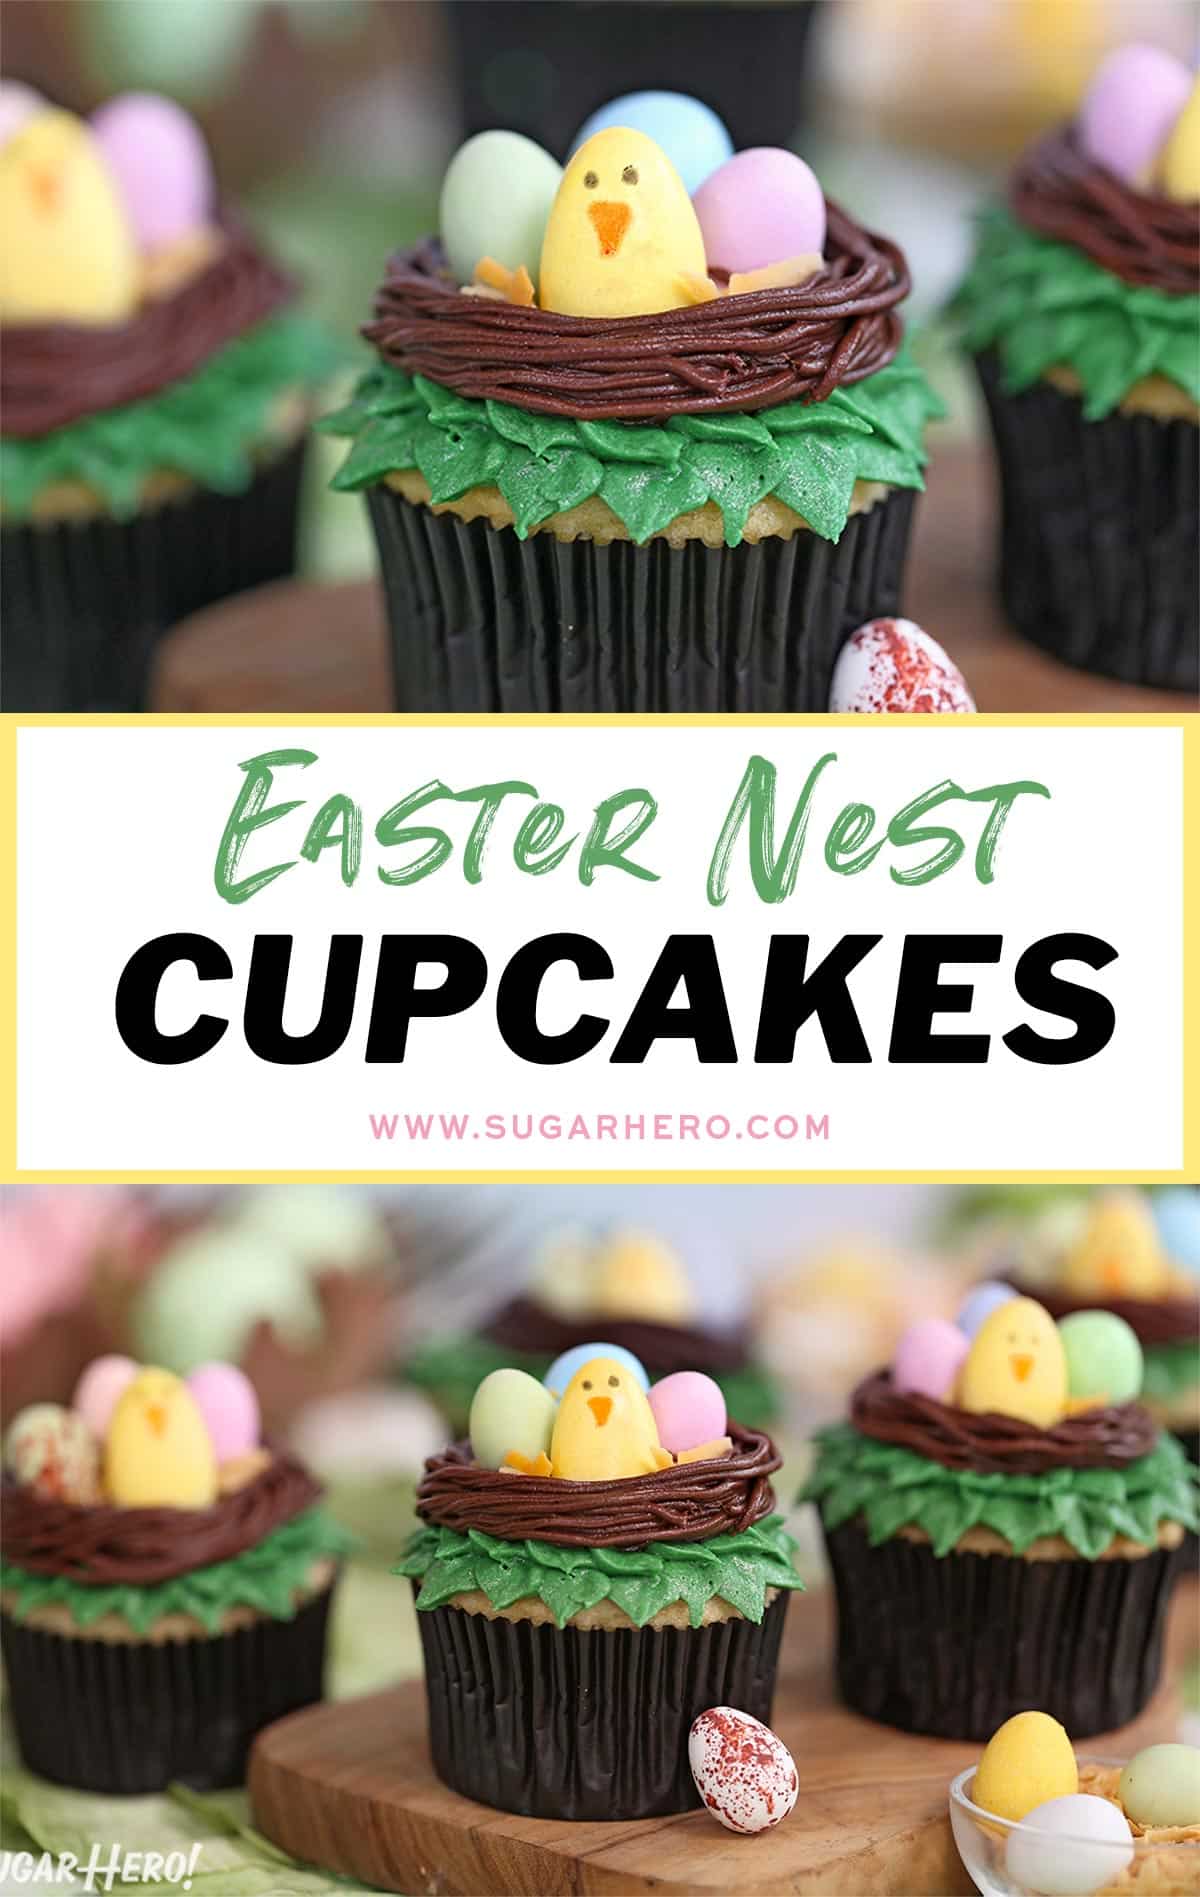 Easter Nest Cupcakes collage with text overlay for Pinterest.